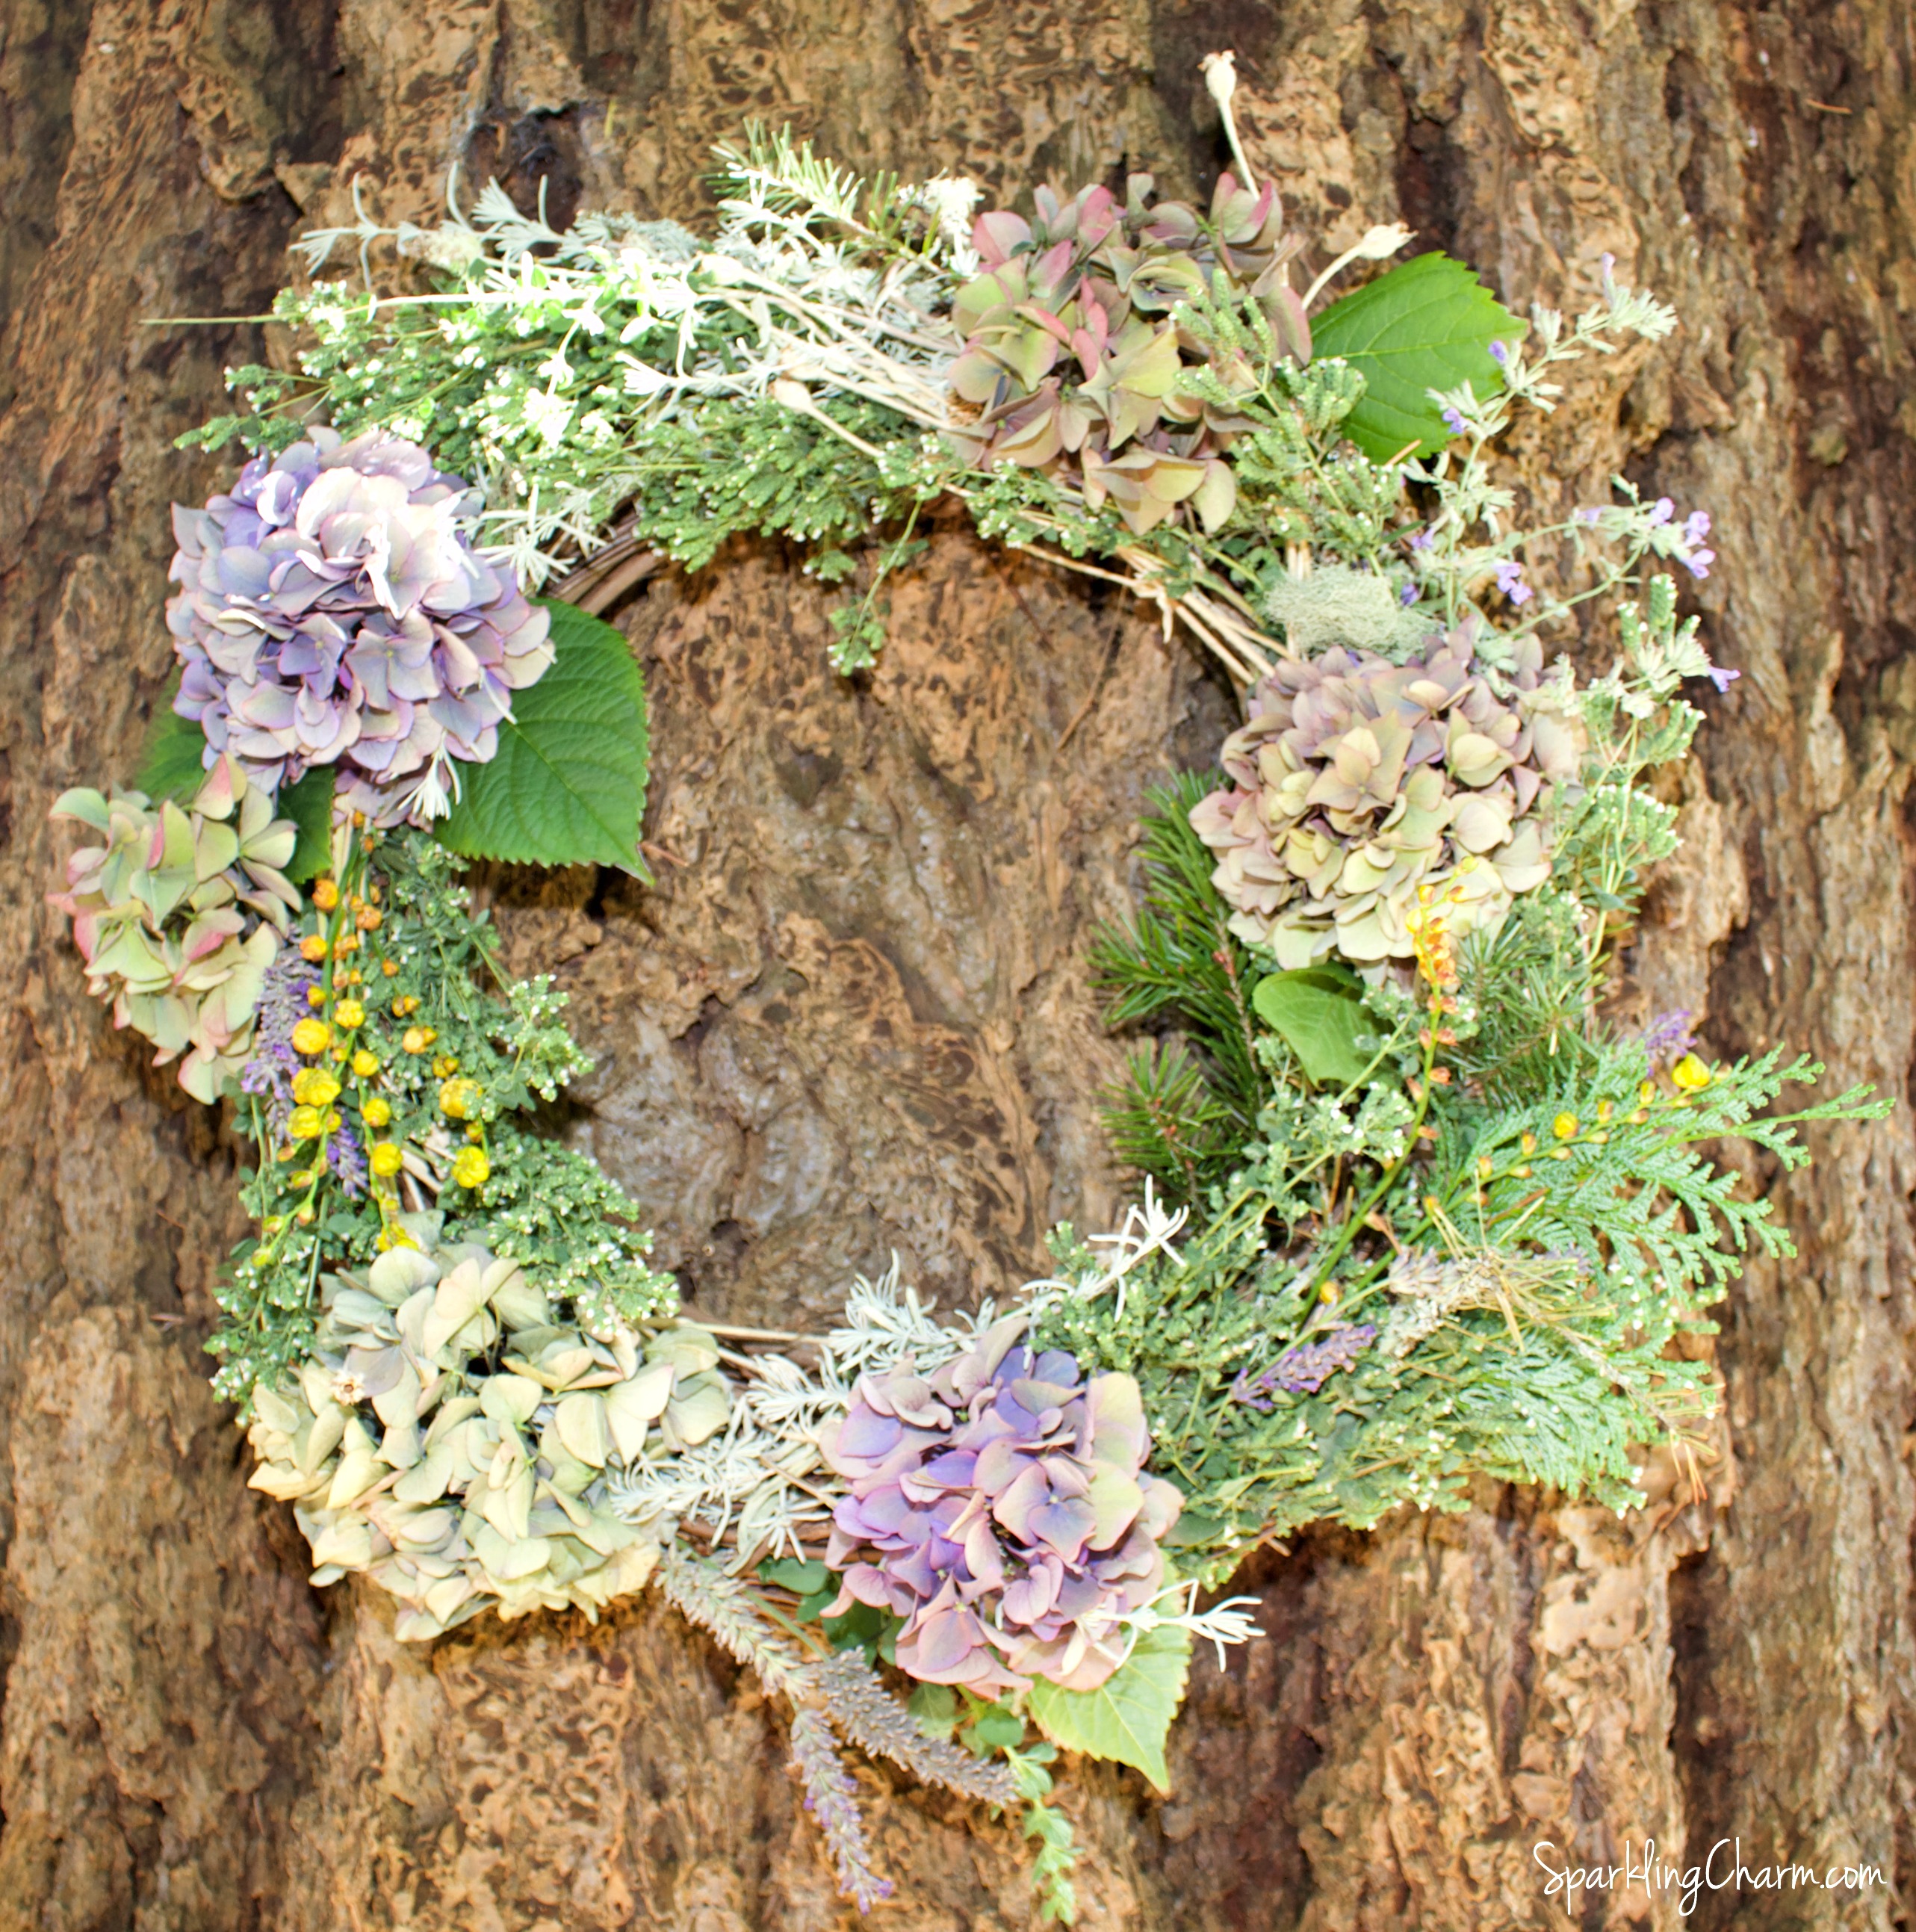 How To Make A Simple Yard Wreath WIth Twigs, Herbs, & Blooms